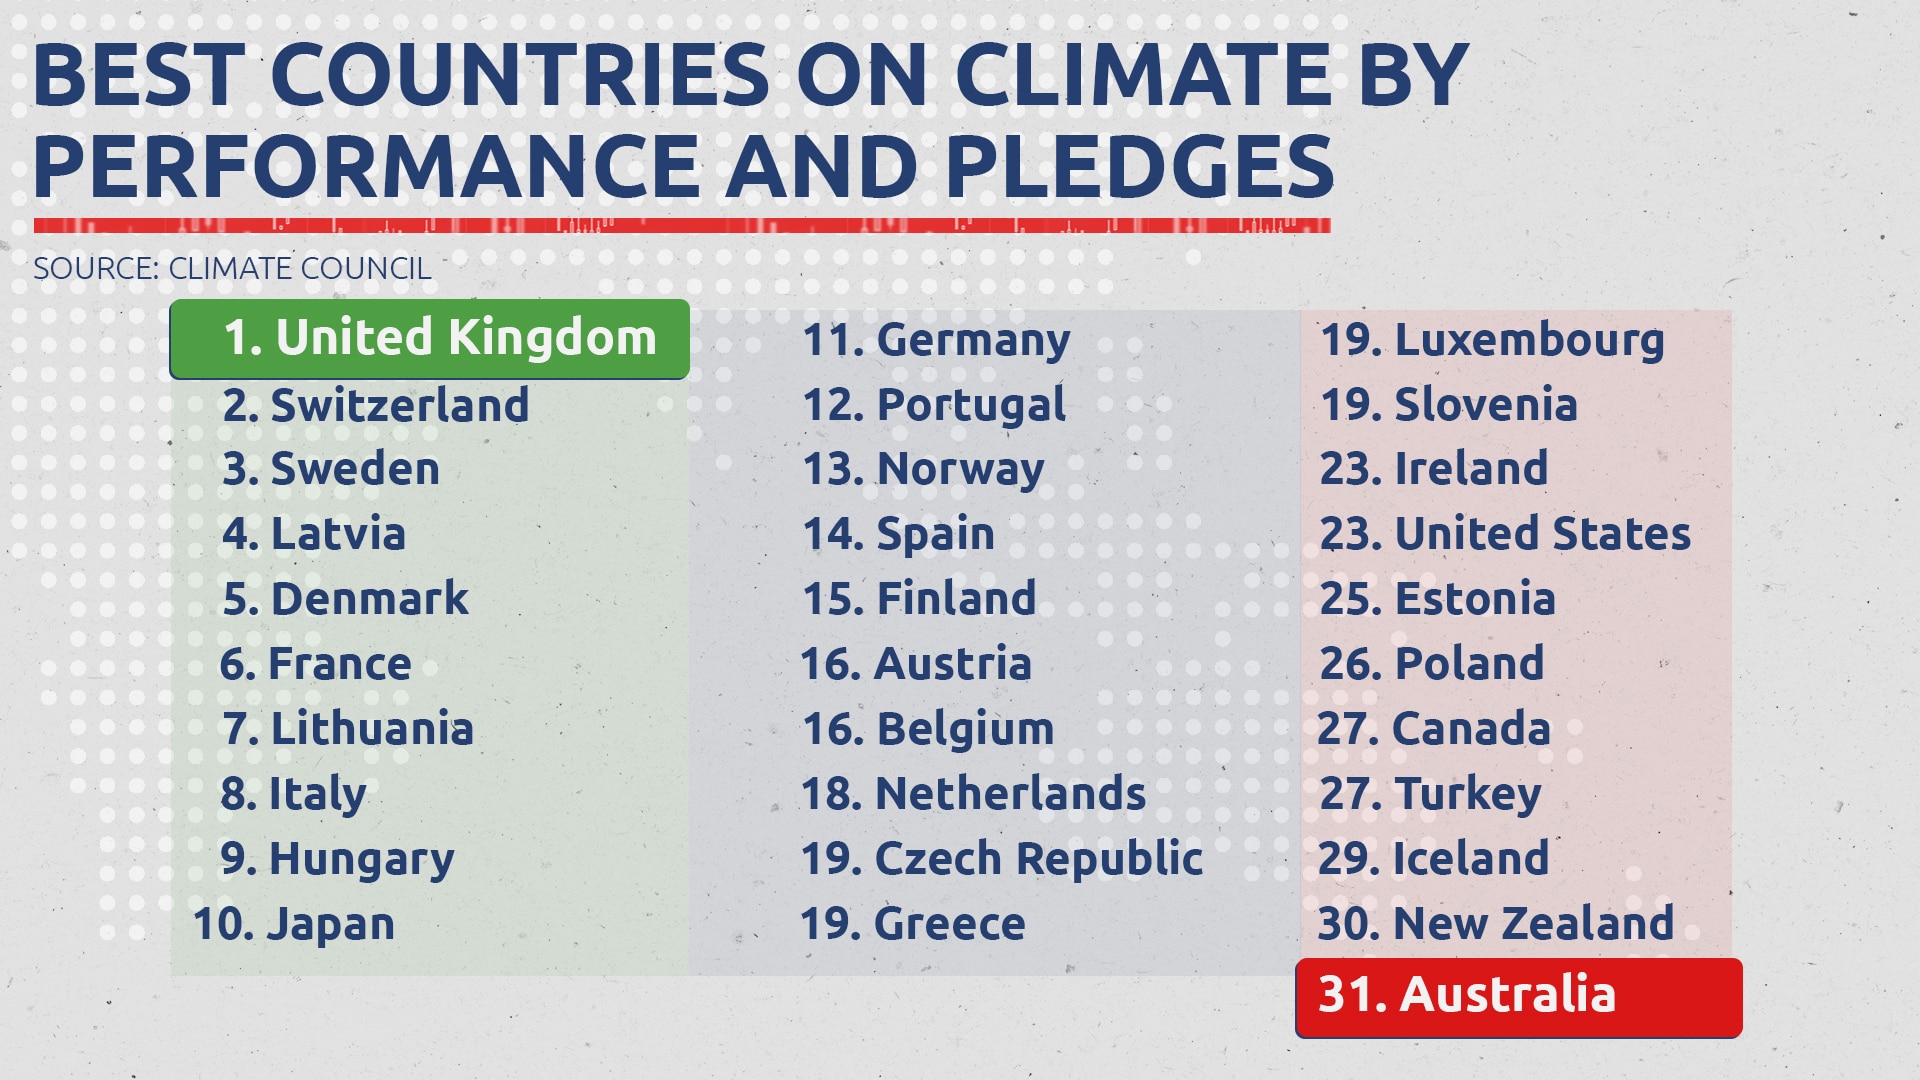 The Climate Council ranked Australia last among wealthy developed countries for its emissions performance and pledges.